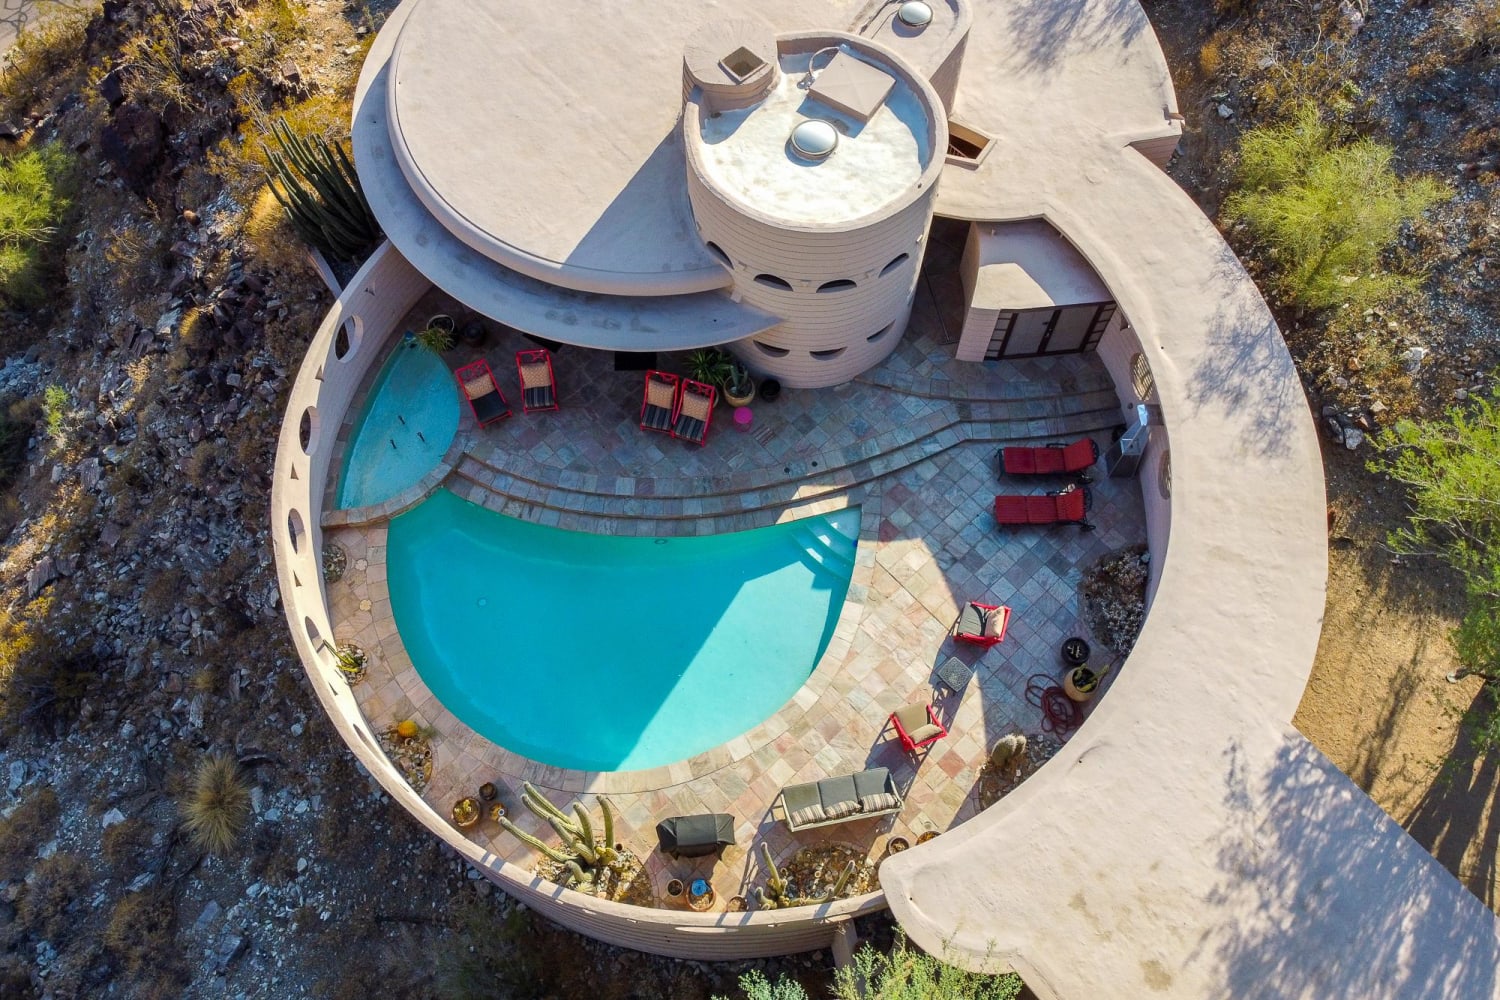 Frank Lloyd Wright's Last Circular Home Design is for Sale in Phoenix! Stunning property